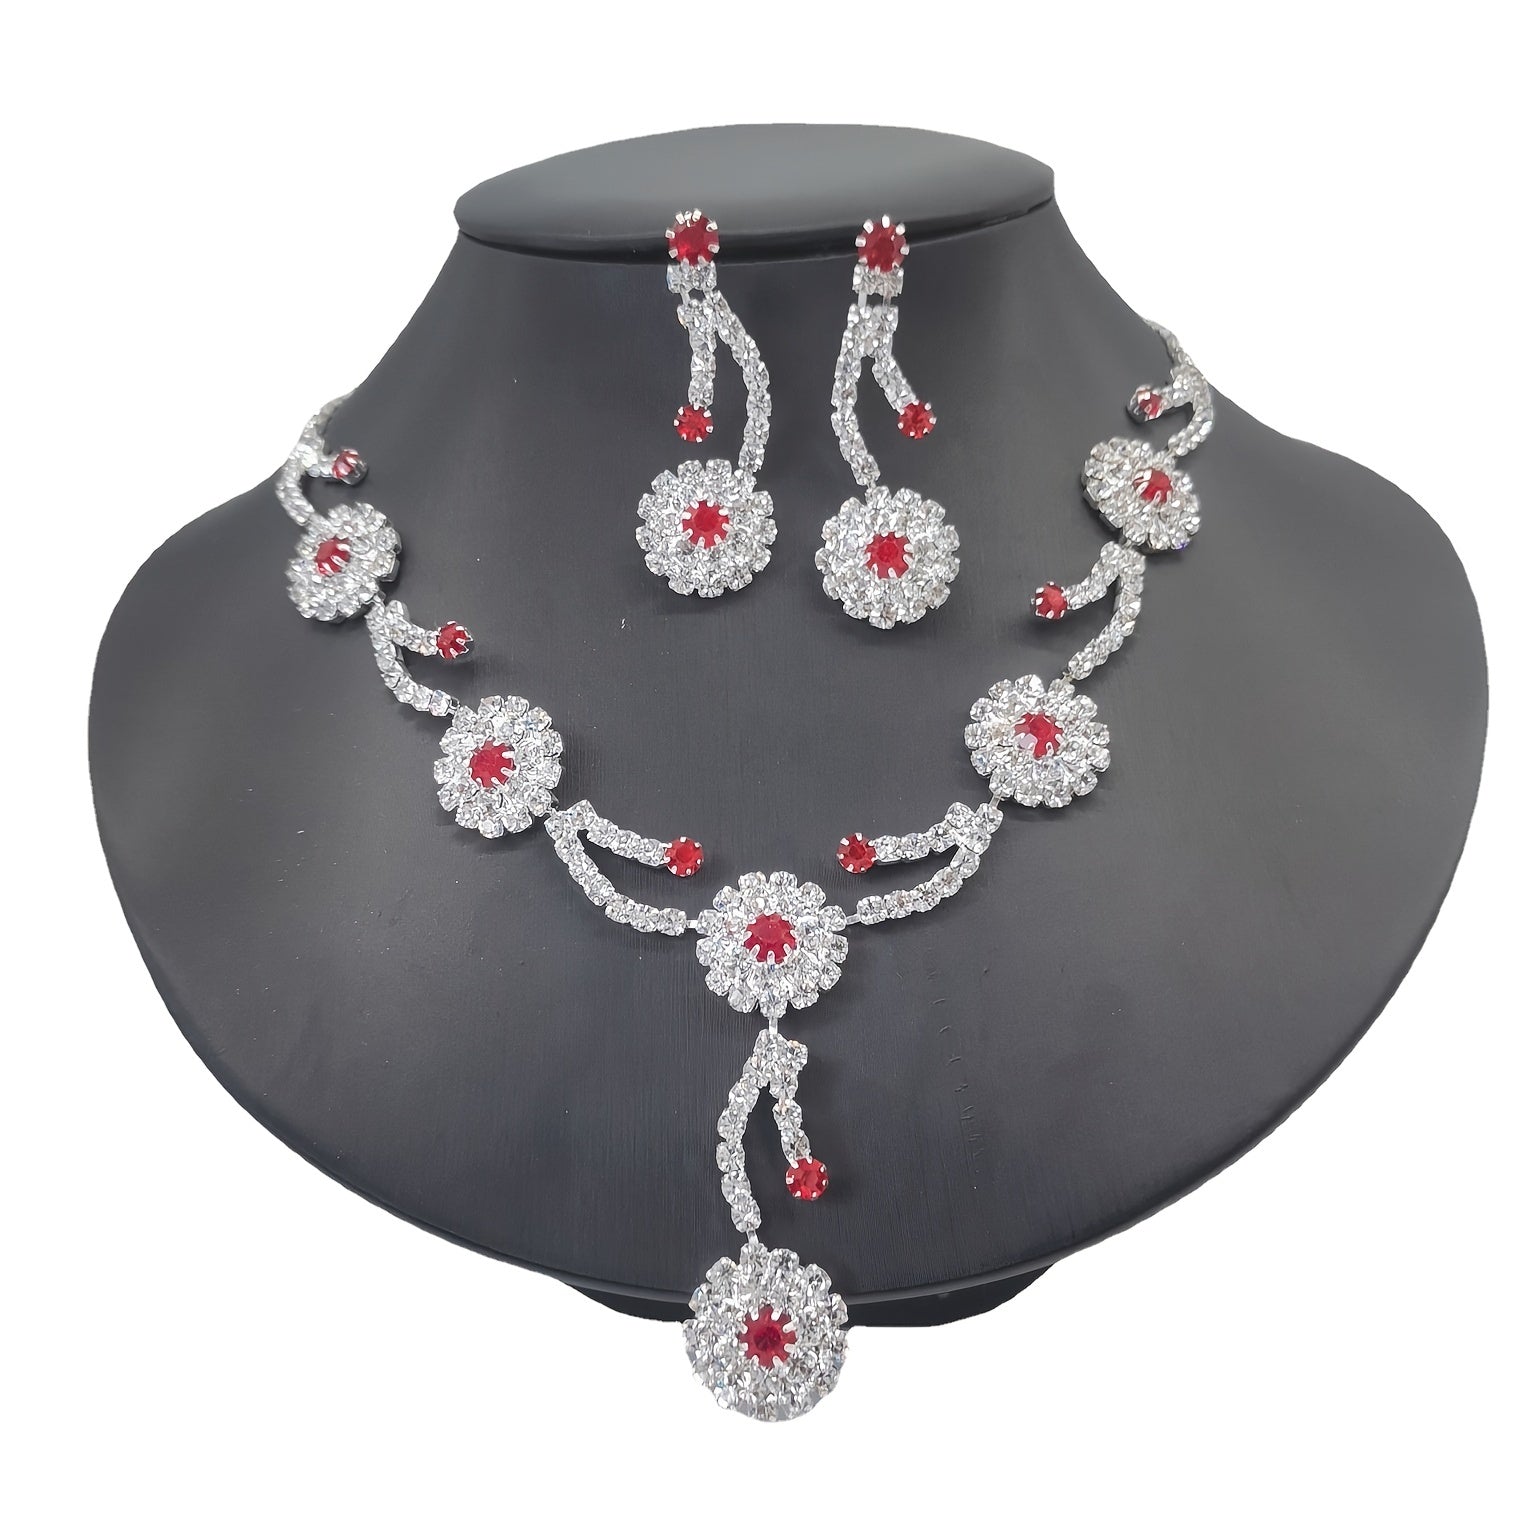 Flower Rhinestone Jewelry Set - Stunning Red Tiny Rhinestone Pendant Necklace and Dangle Earrings for Women and Girls - Perfect for Parties, Proms, and Costumes